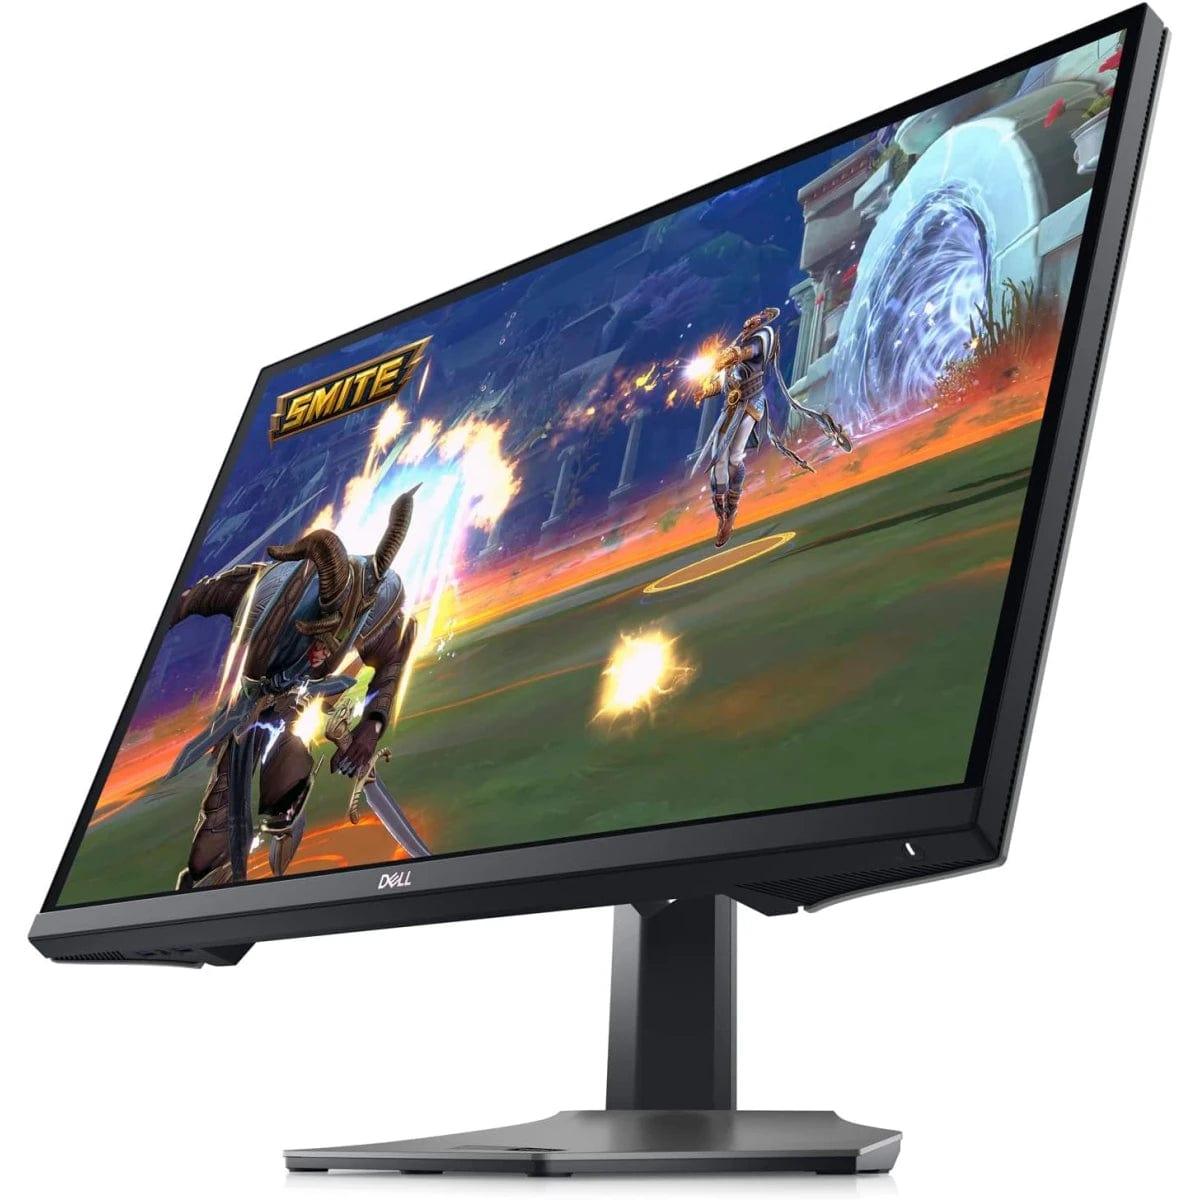 DELL Computer Monitors Dell G2723H 27” Fast IPS Full HD up to 280Hz (OC) 0.5ms 99% sRGB G-SYNC Compatible Adjustable Stand 2x HDMI 1x DP & USB Hub - Ascent Gray